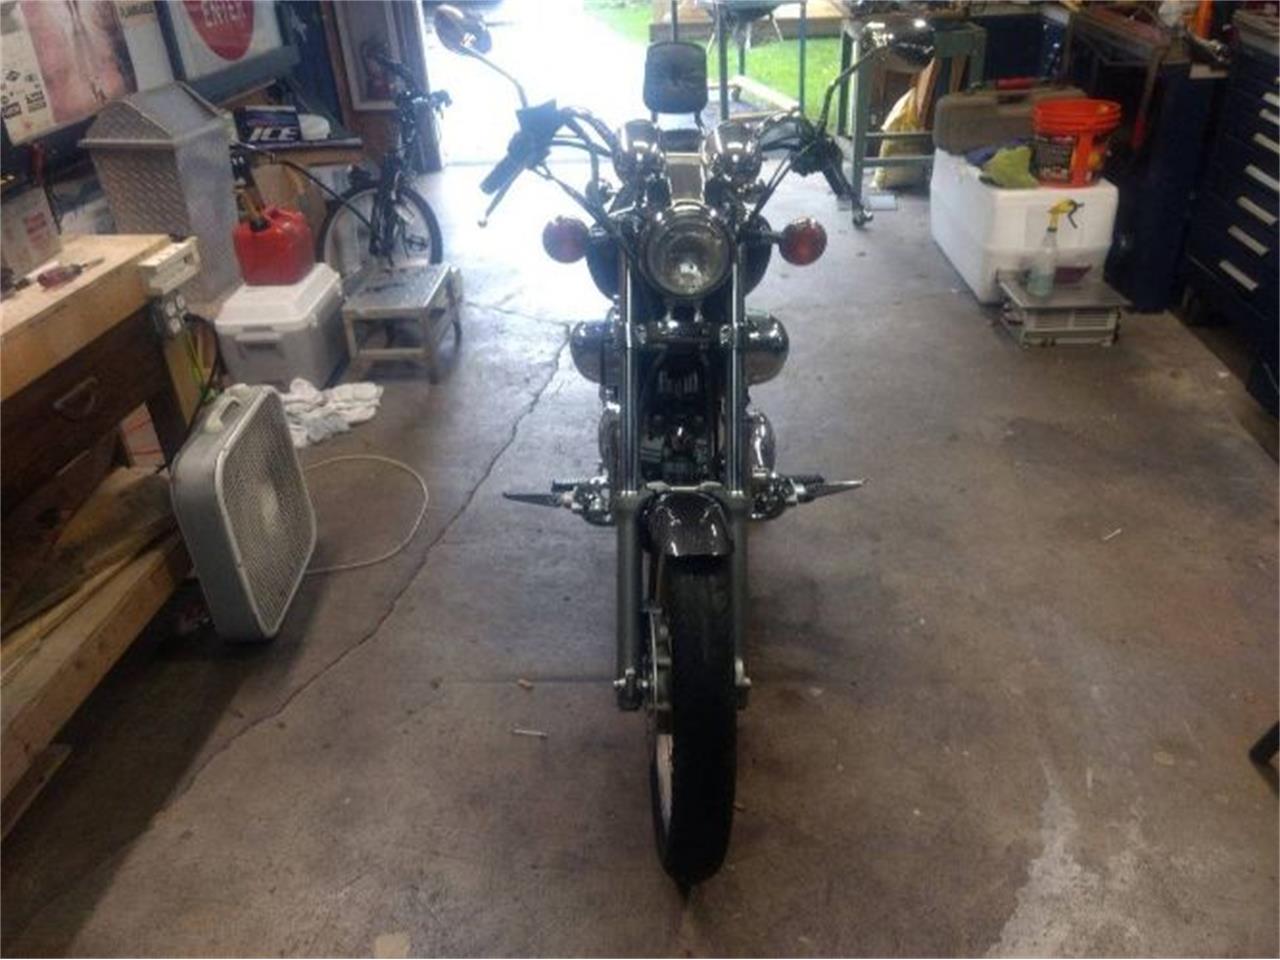 1993 Yamaha Motorcycle for sale in Cadillac, MI – photo 2